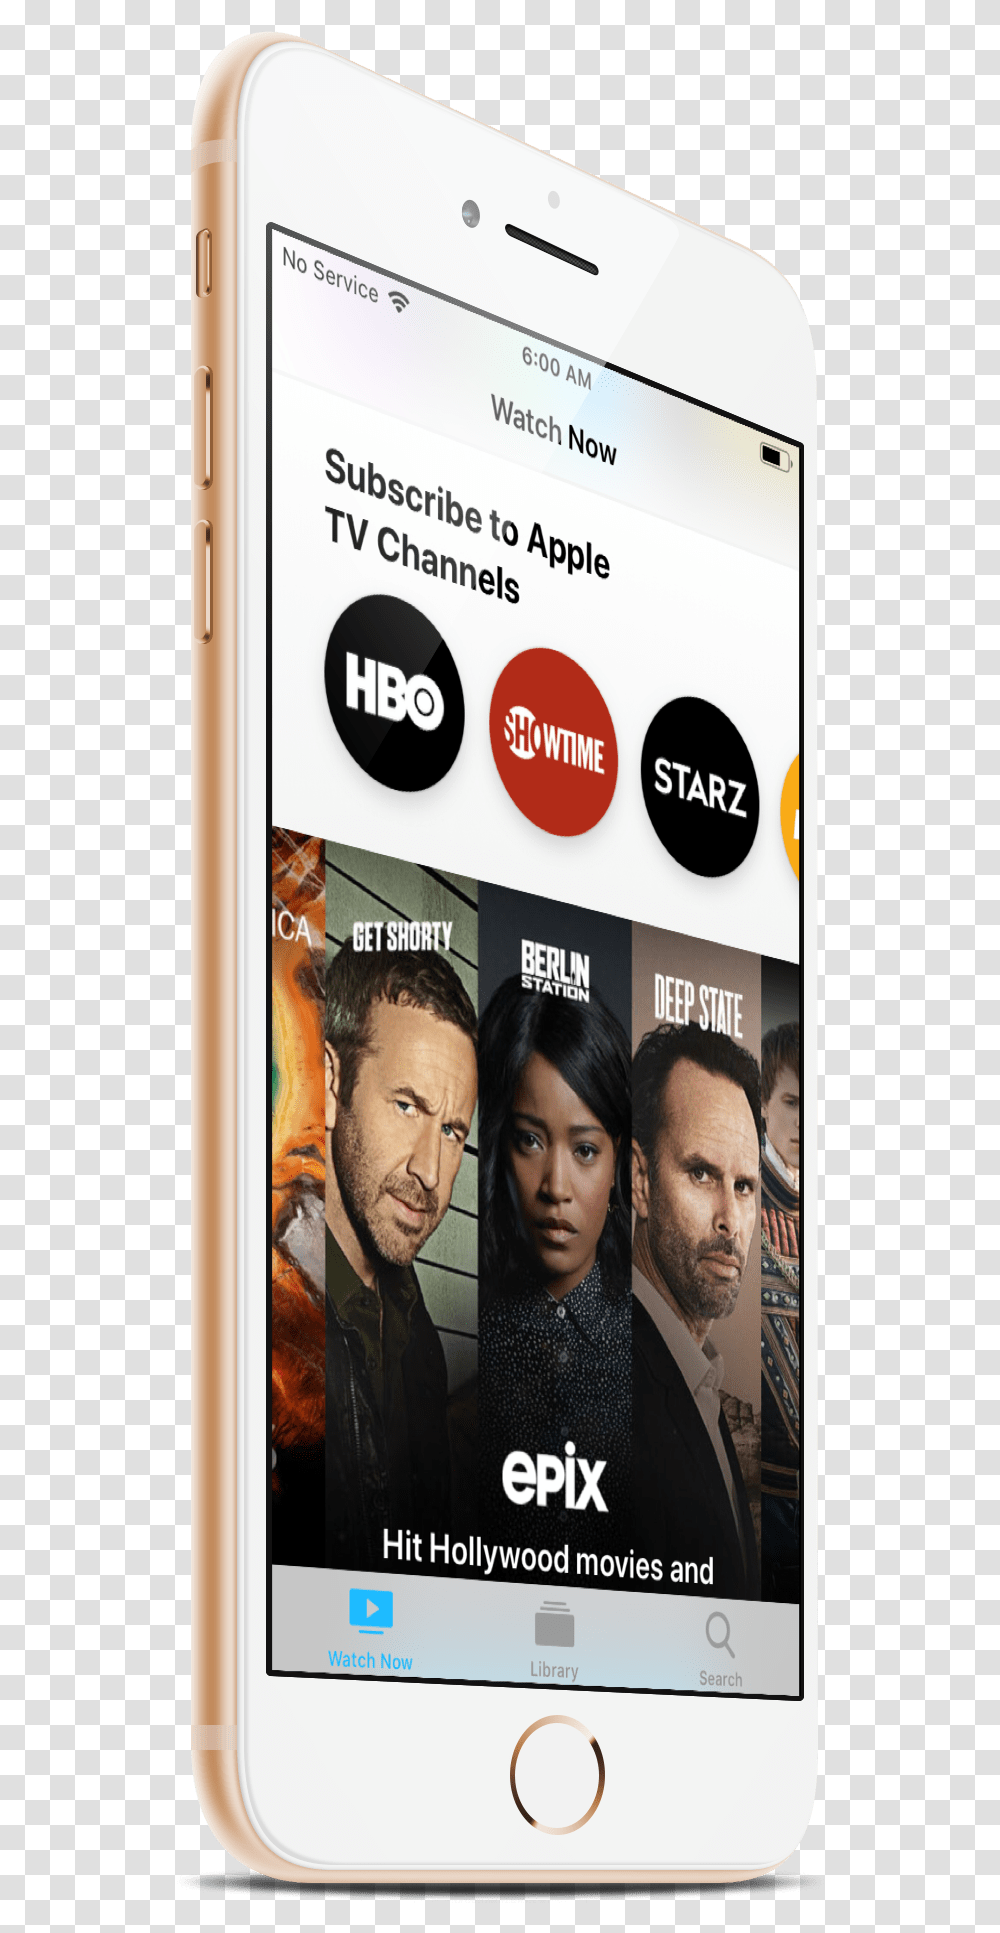 Hbo In Apple Tv Channels Smartphone, Mobile Phone, Electronics, Cell Phone, Person Transparent Png